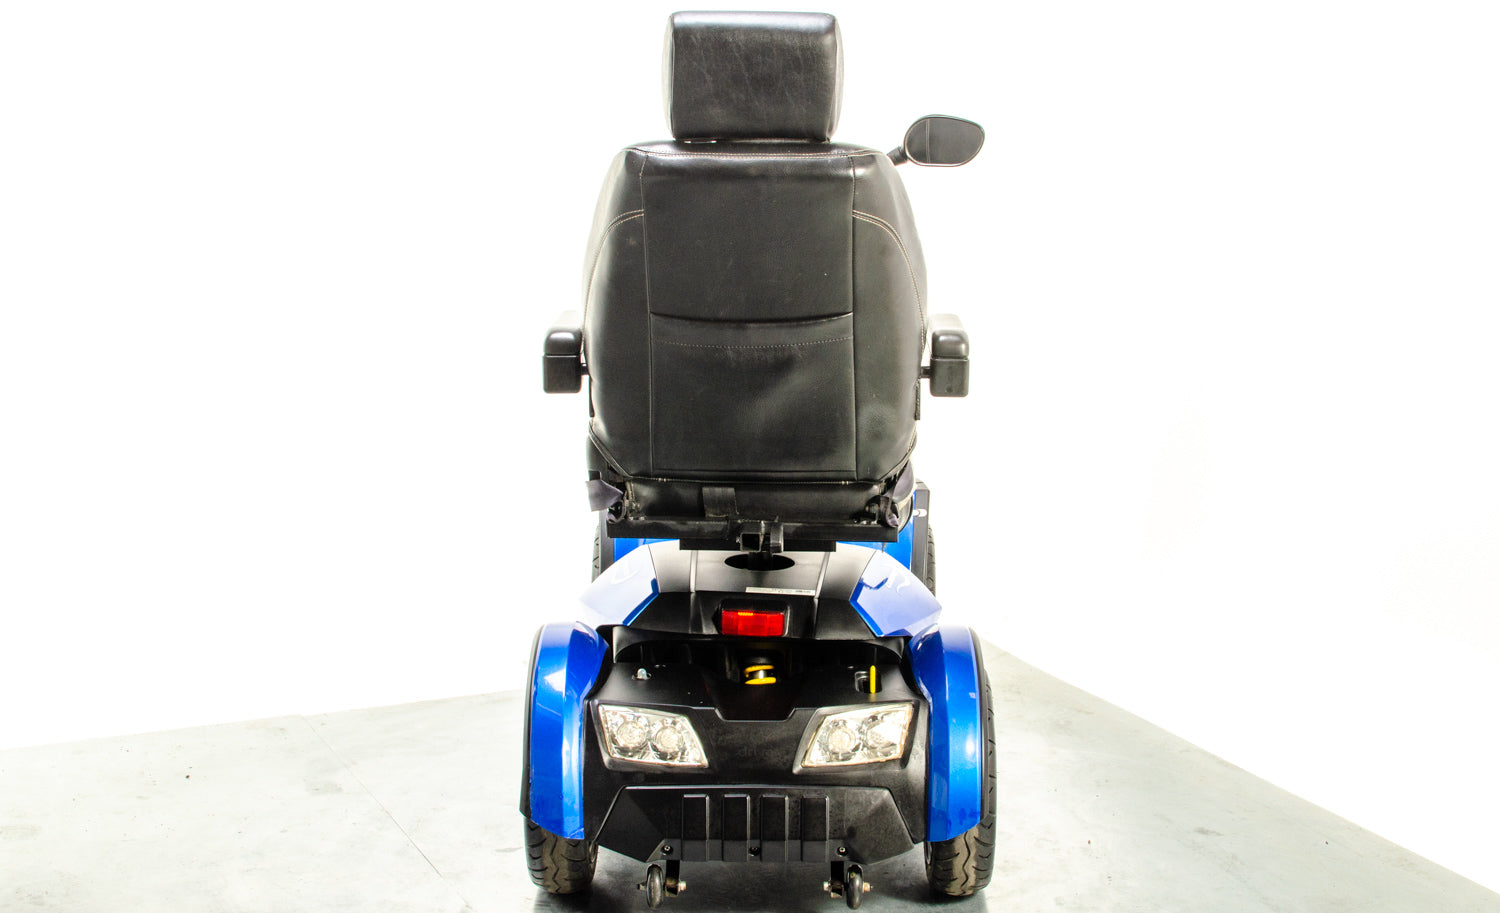 Drive Cobra Used Mobility Scooter Large All-Terrain Fast Road Legal Captain Seat Blue